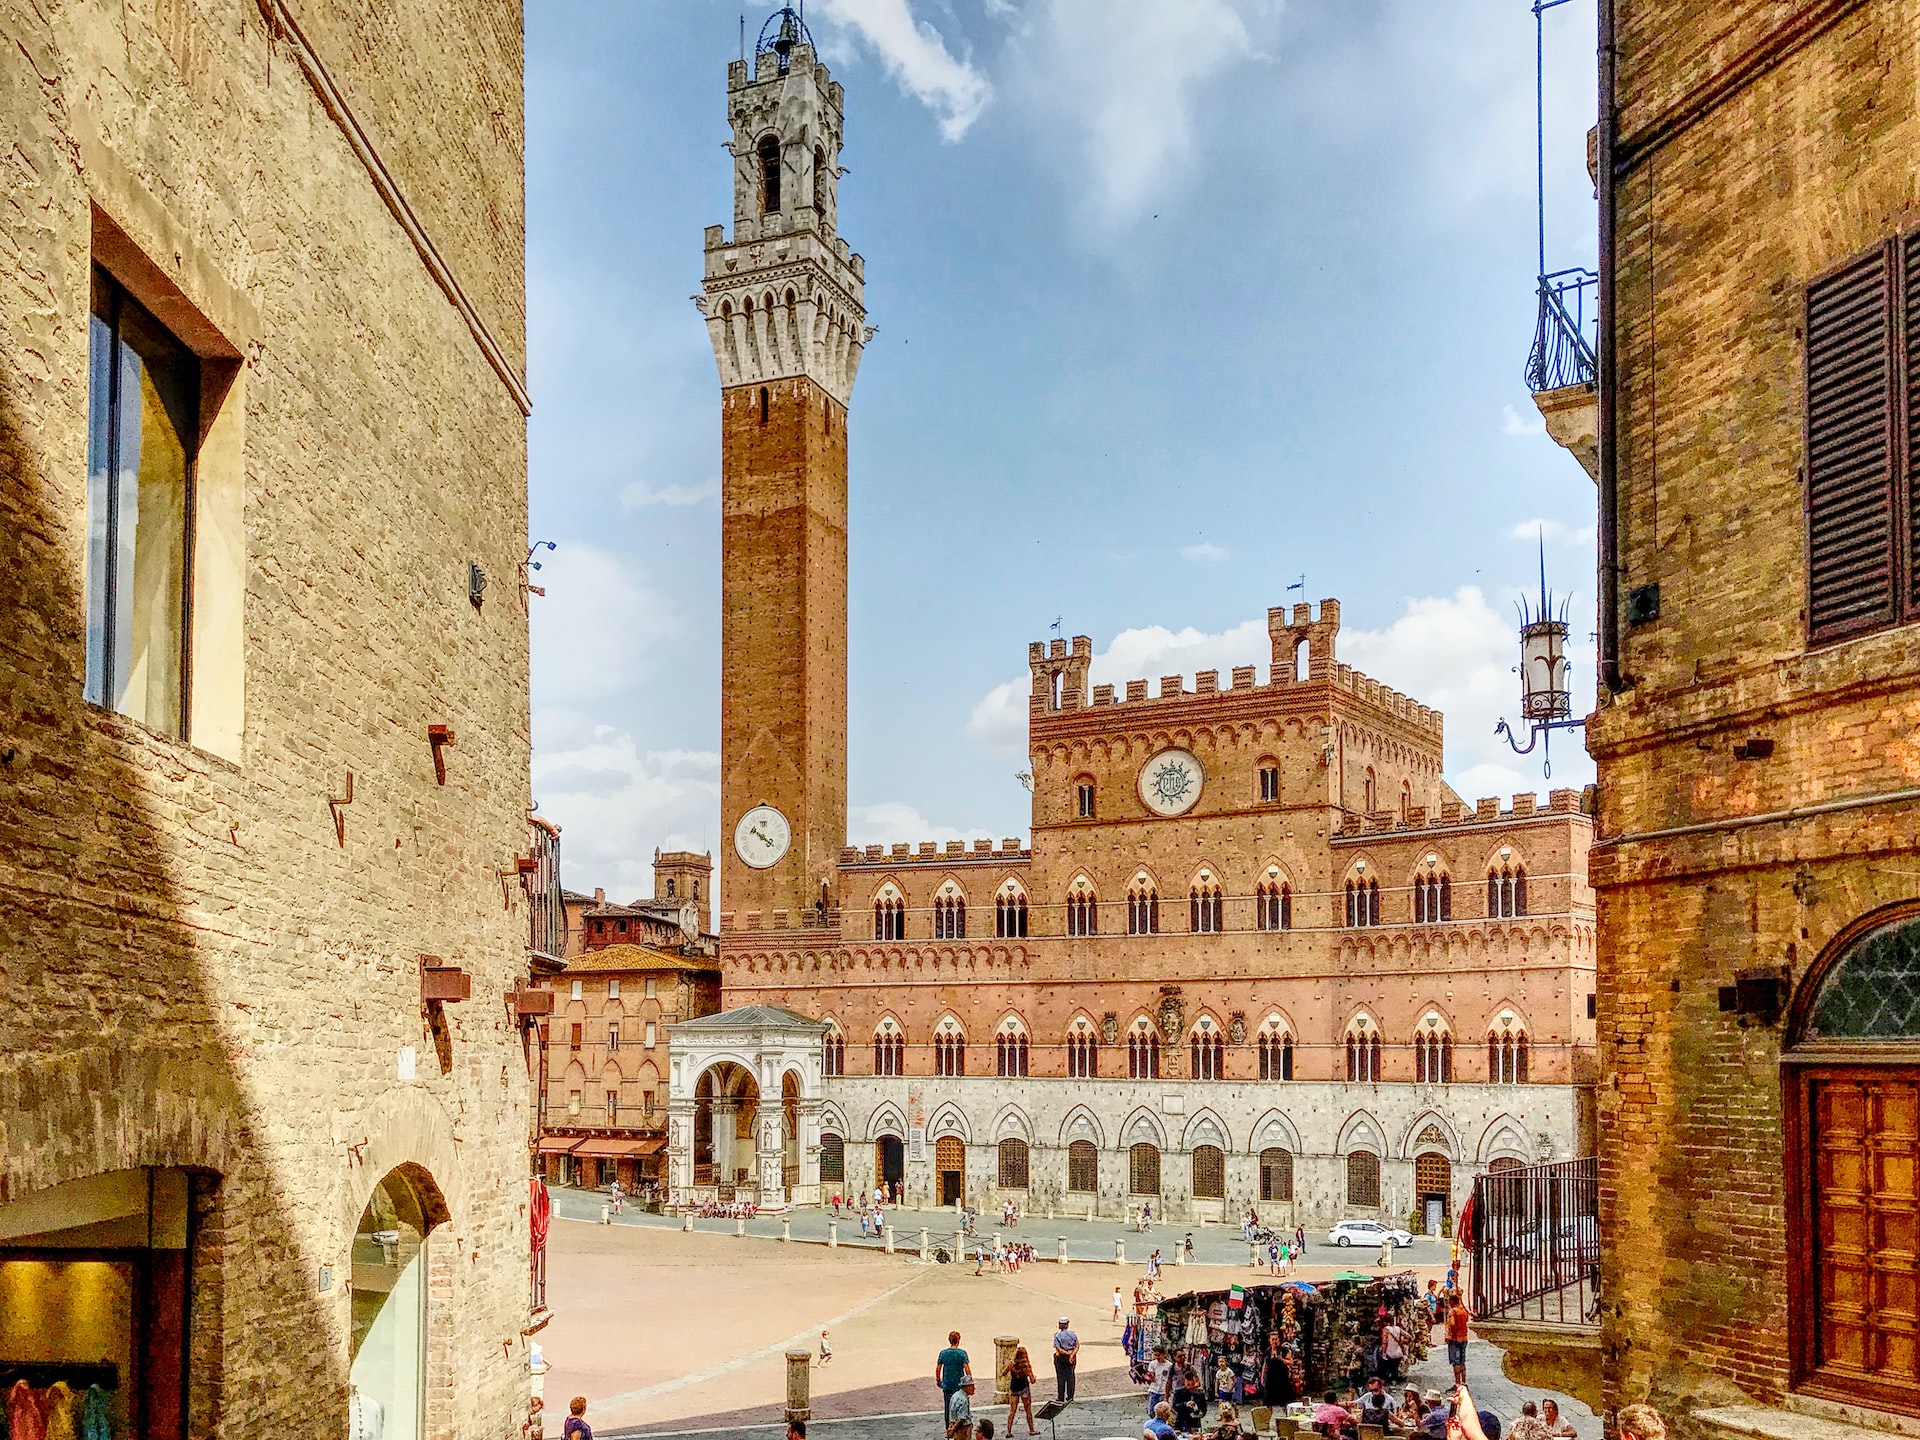 The tower of Mangia in beautiful Italian city Siena
